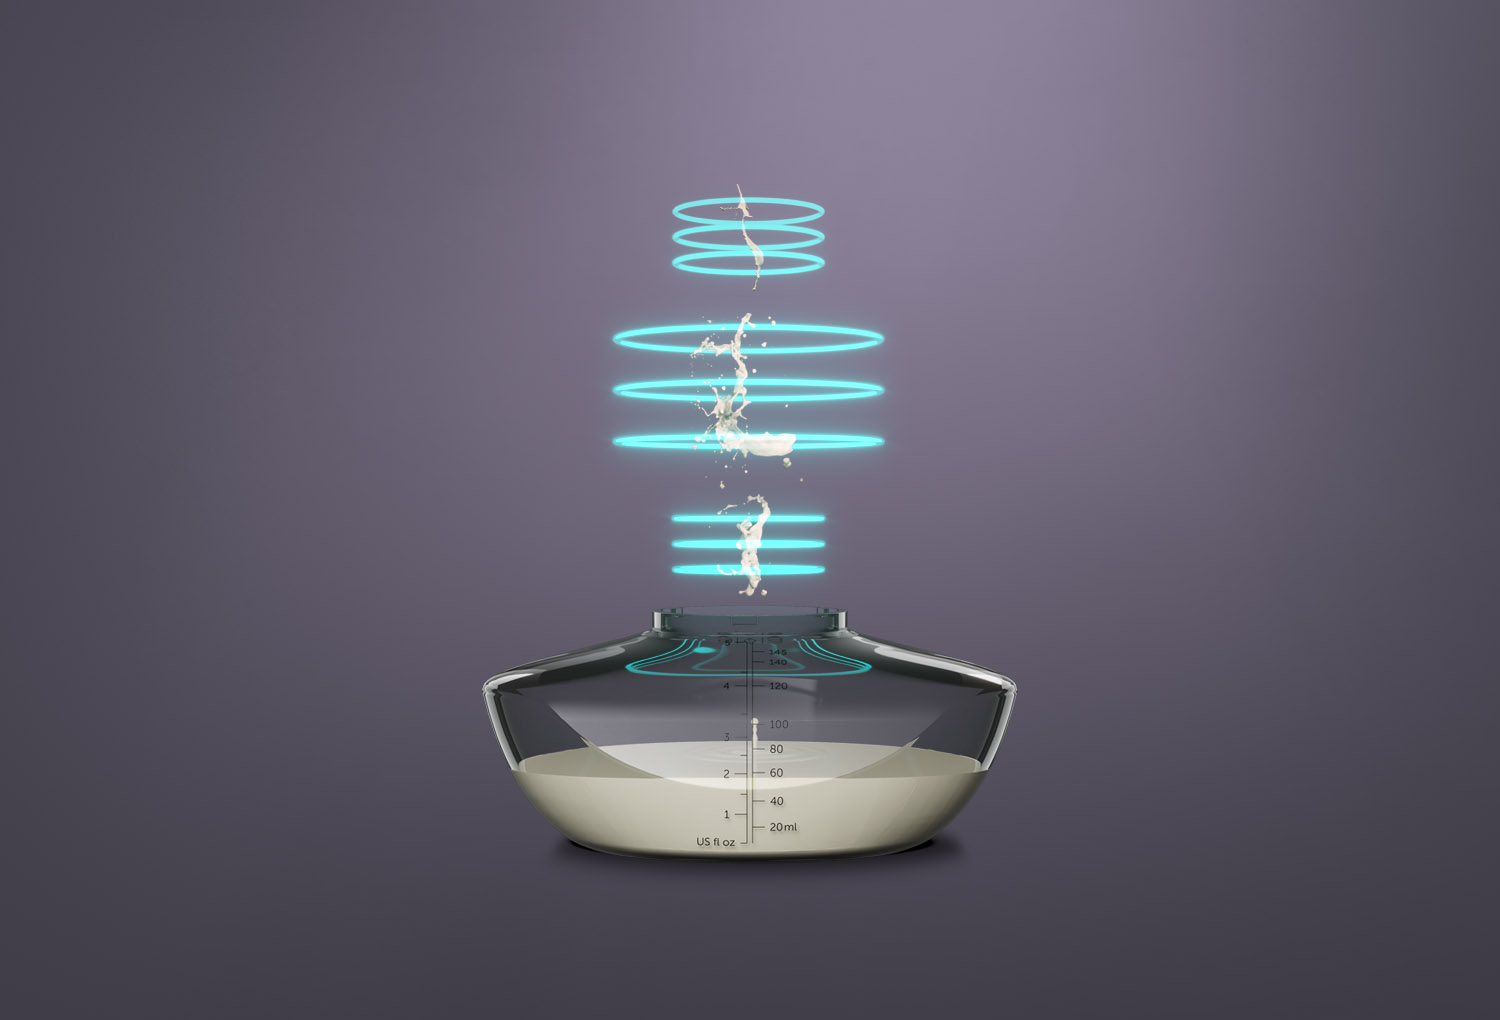 Illustration of vibration pattern emitting from the milk collecting part of an Elvie pump, to symbolise multi-switch mode